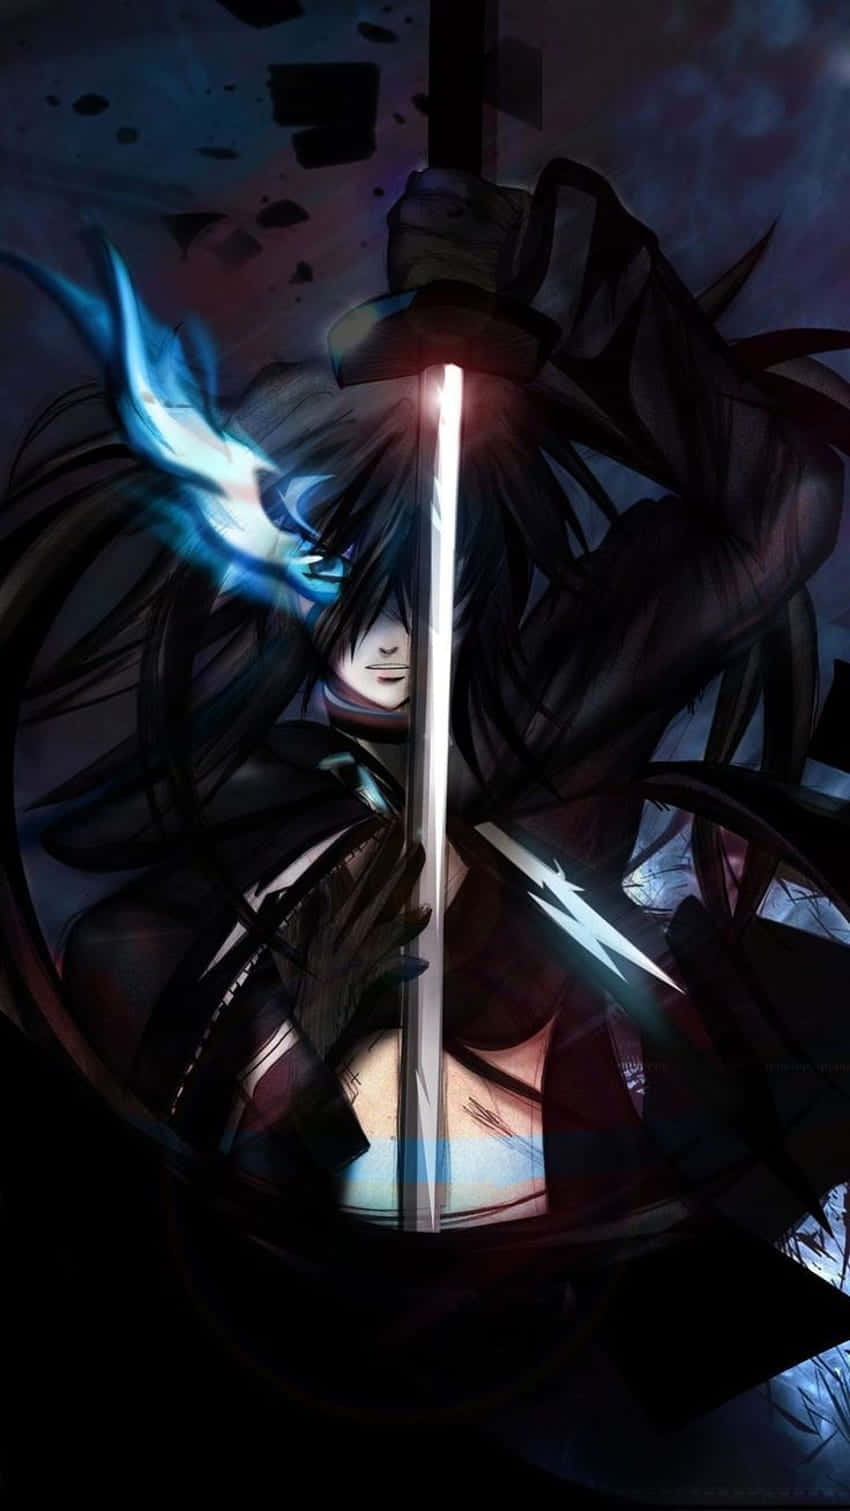 Black Rock Shooter - General Discussion - Anime Discussion - Anime Forums